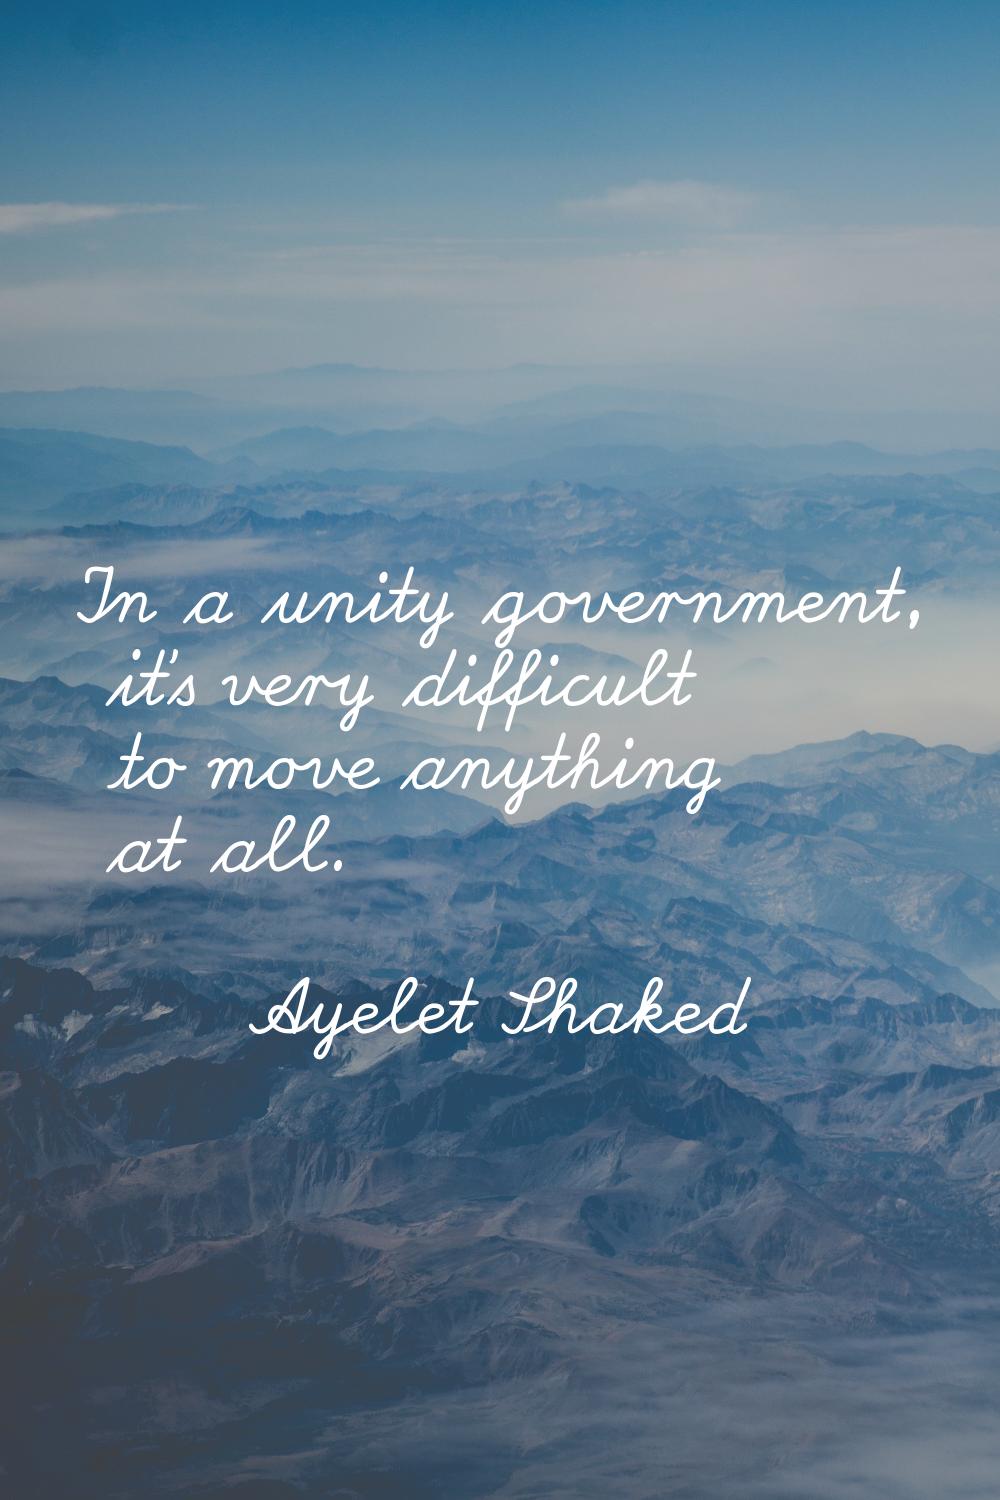 In a unity government, it's very difficult to move anything at all.